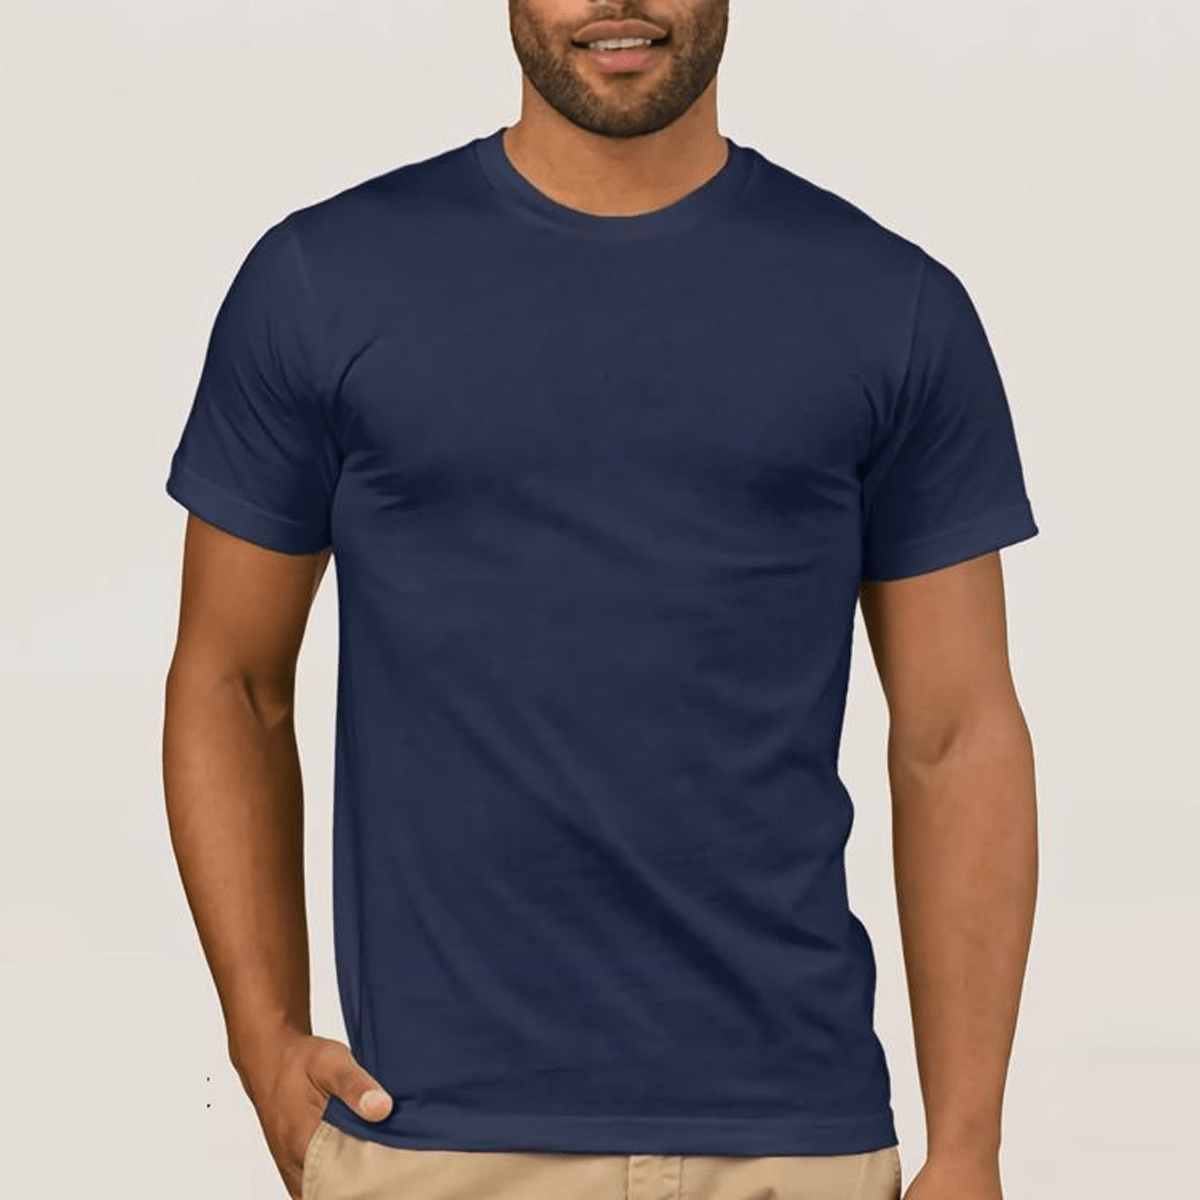 This is What An Awesome Brother Looks Like - Casual 160Gsm Round Neck T Shirts